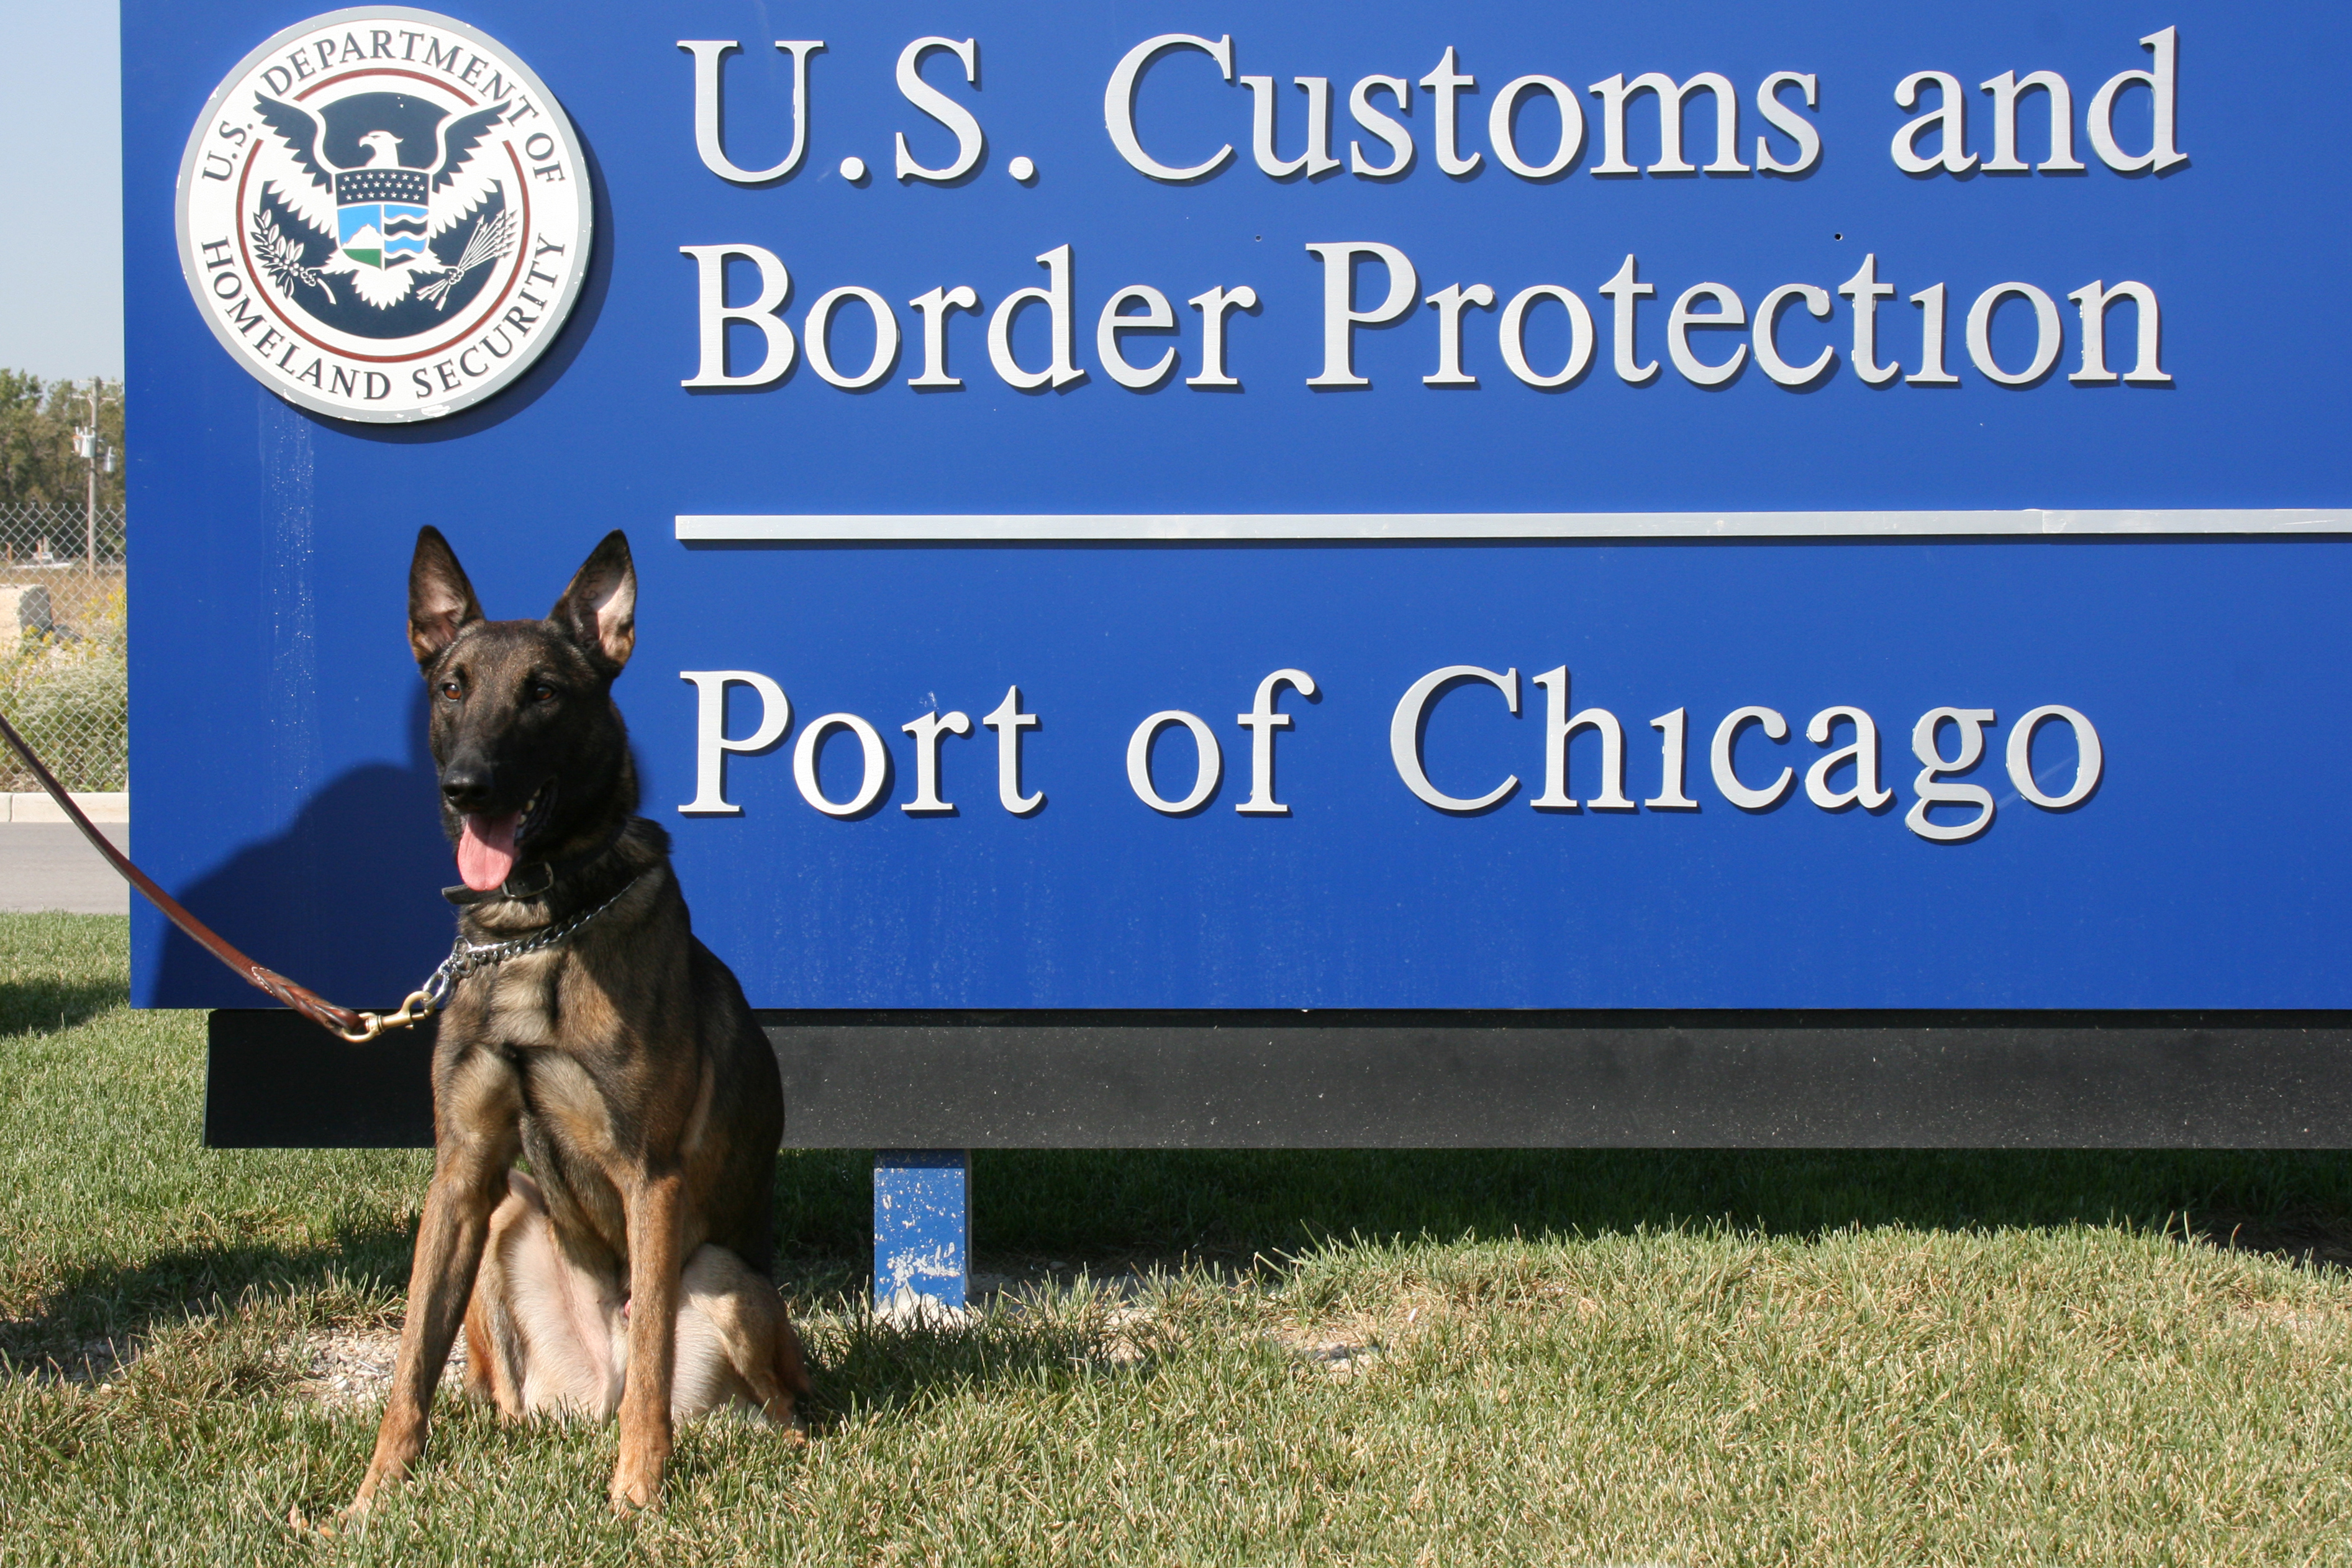 A dog sits in front of the sign for the Chicago port's U.S. Customs and Border Protection branch